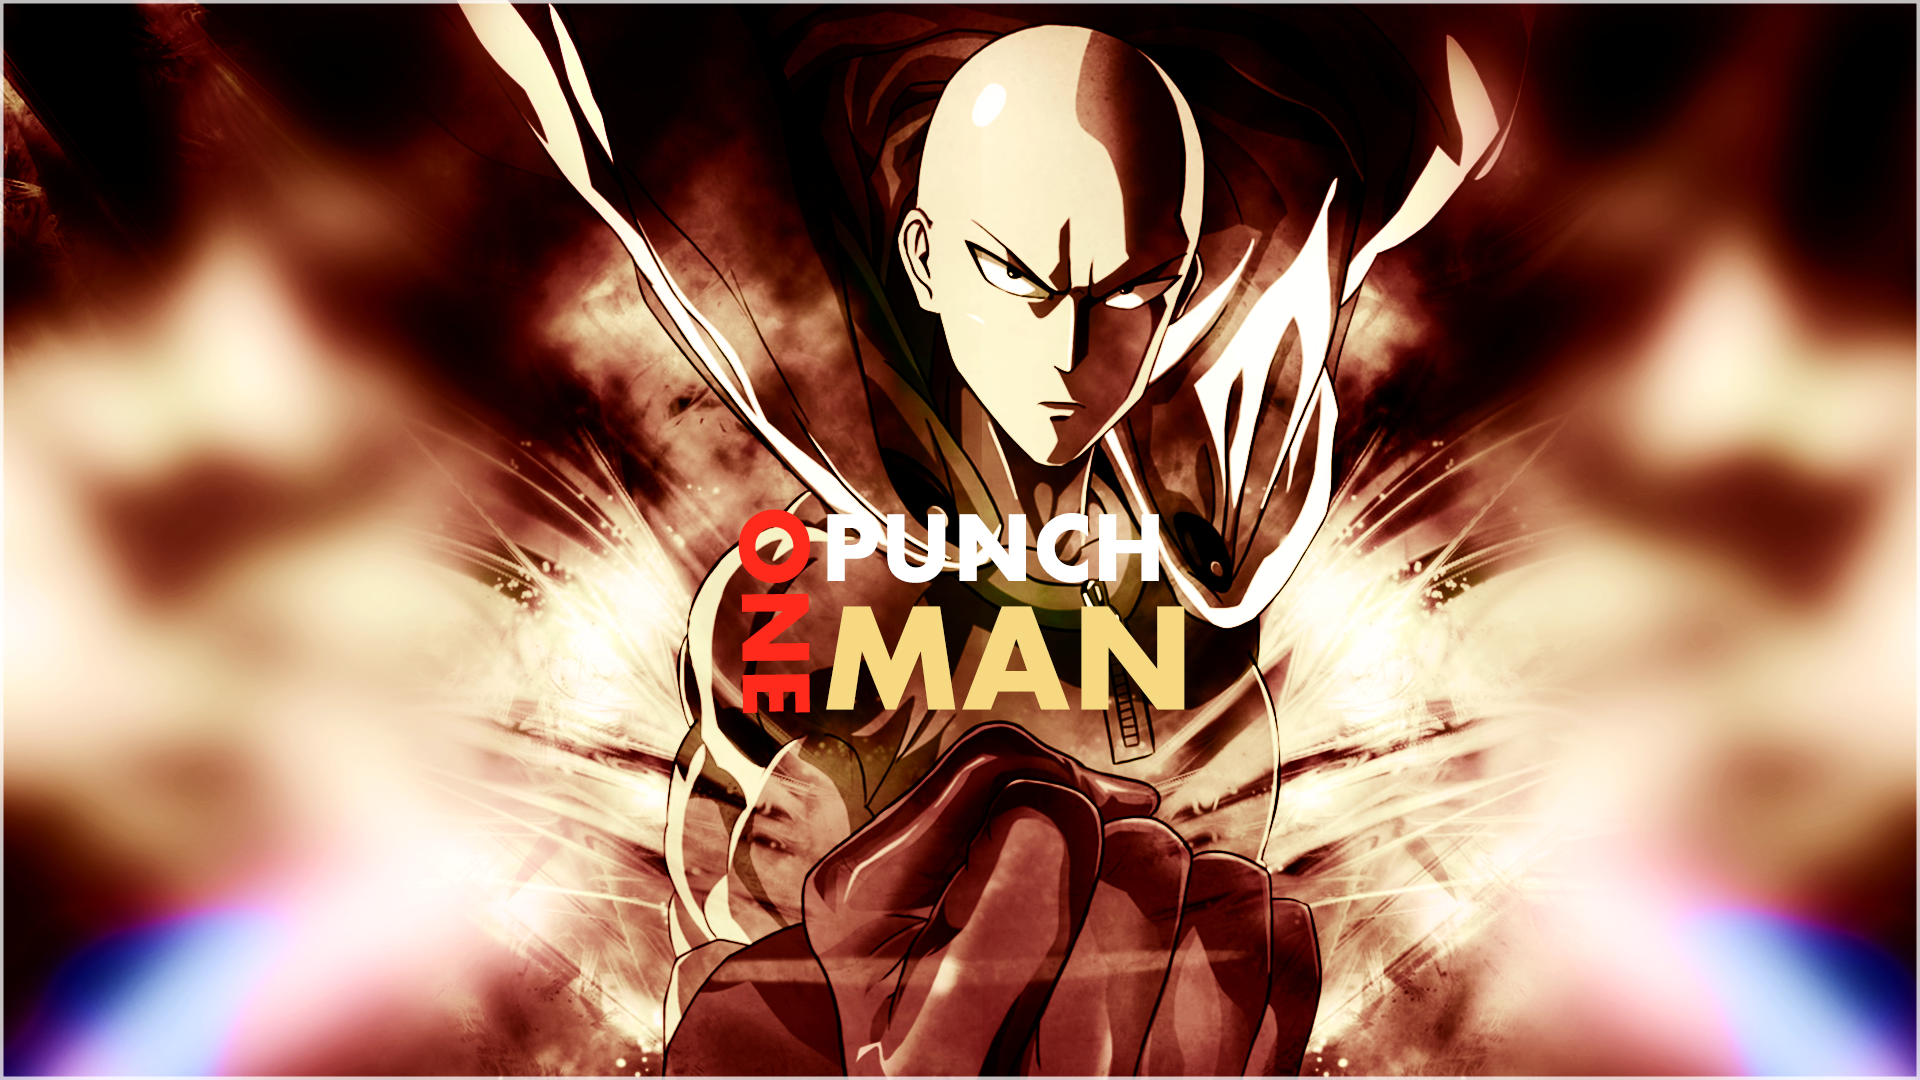 One punch background, I made for my pc wallpaper. How did I do